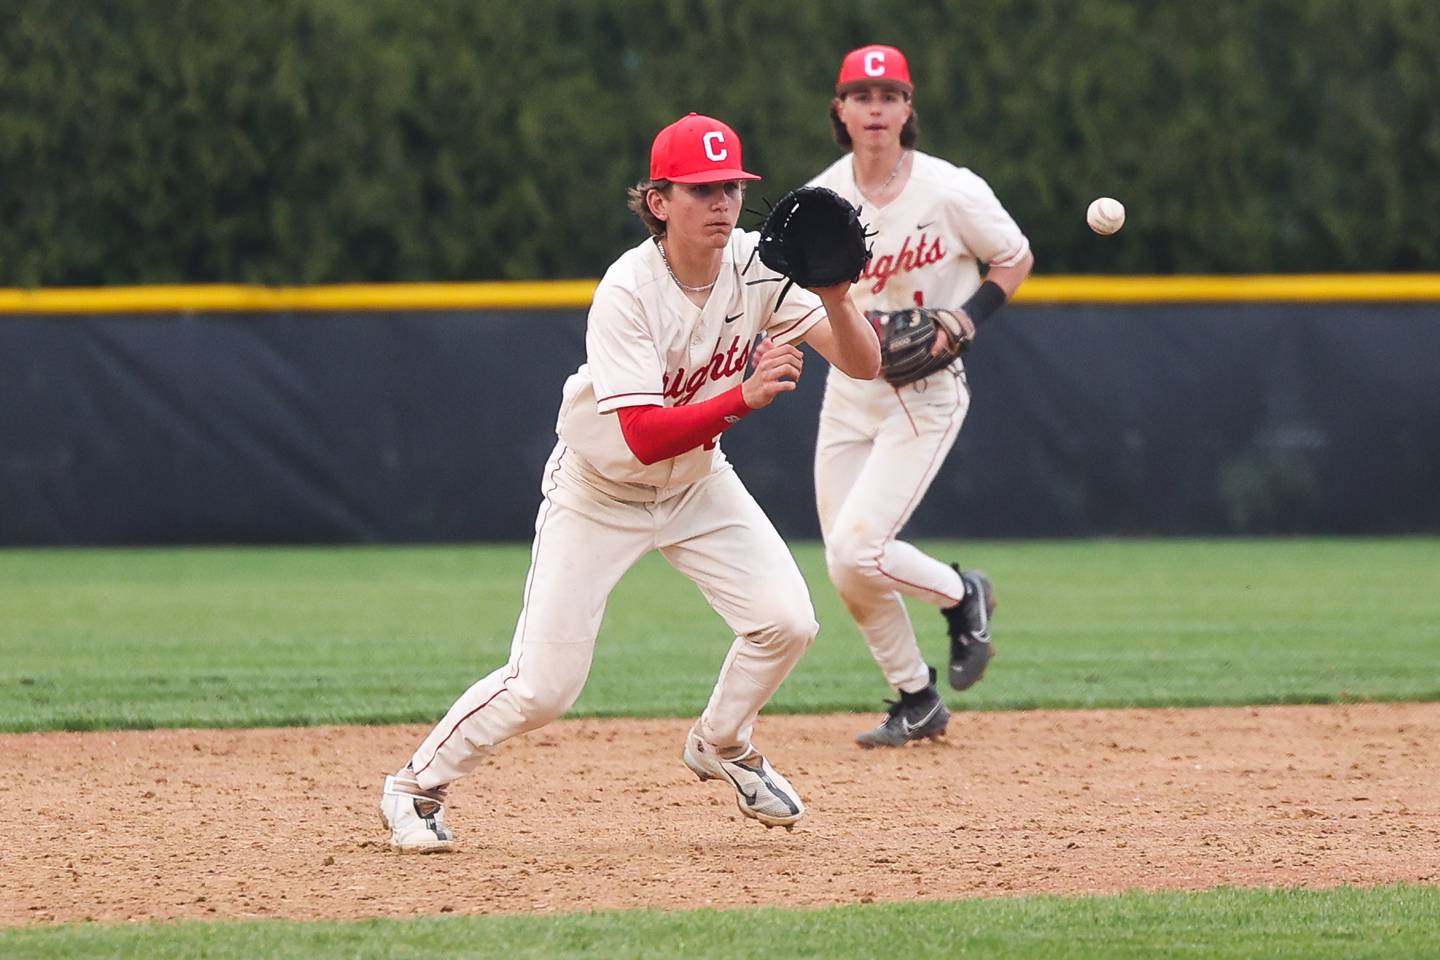 Lincoln-Way Central’s Collin Senkpeil fields the ground ball against Lincoln-Way West on Monday, May 8, 2023 in New Lenox.